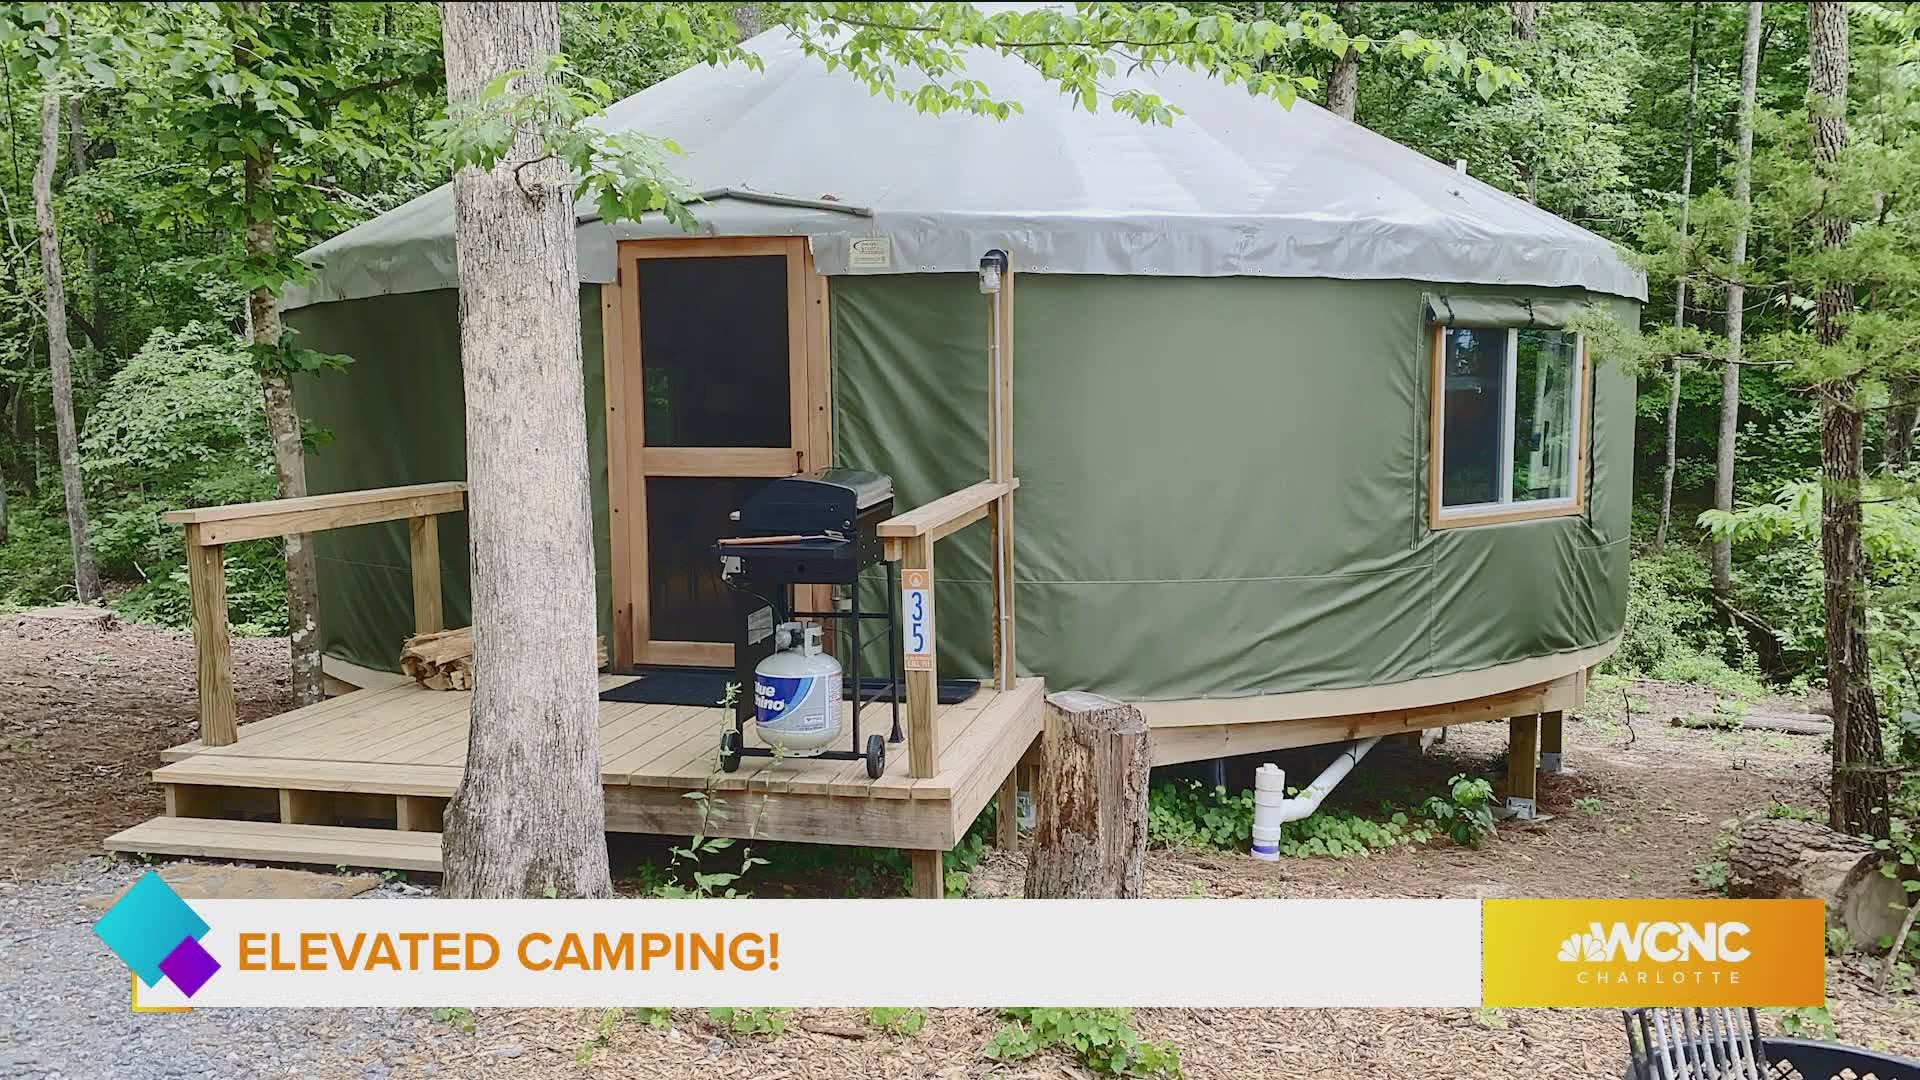 Check it out! You might just like camping afterall.